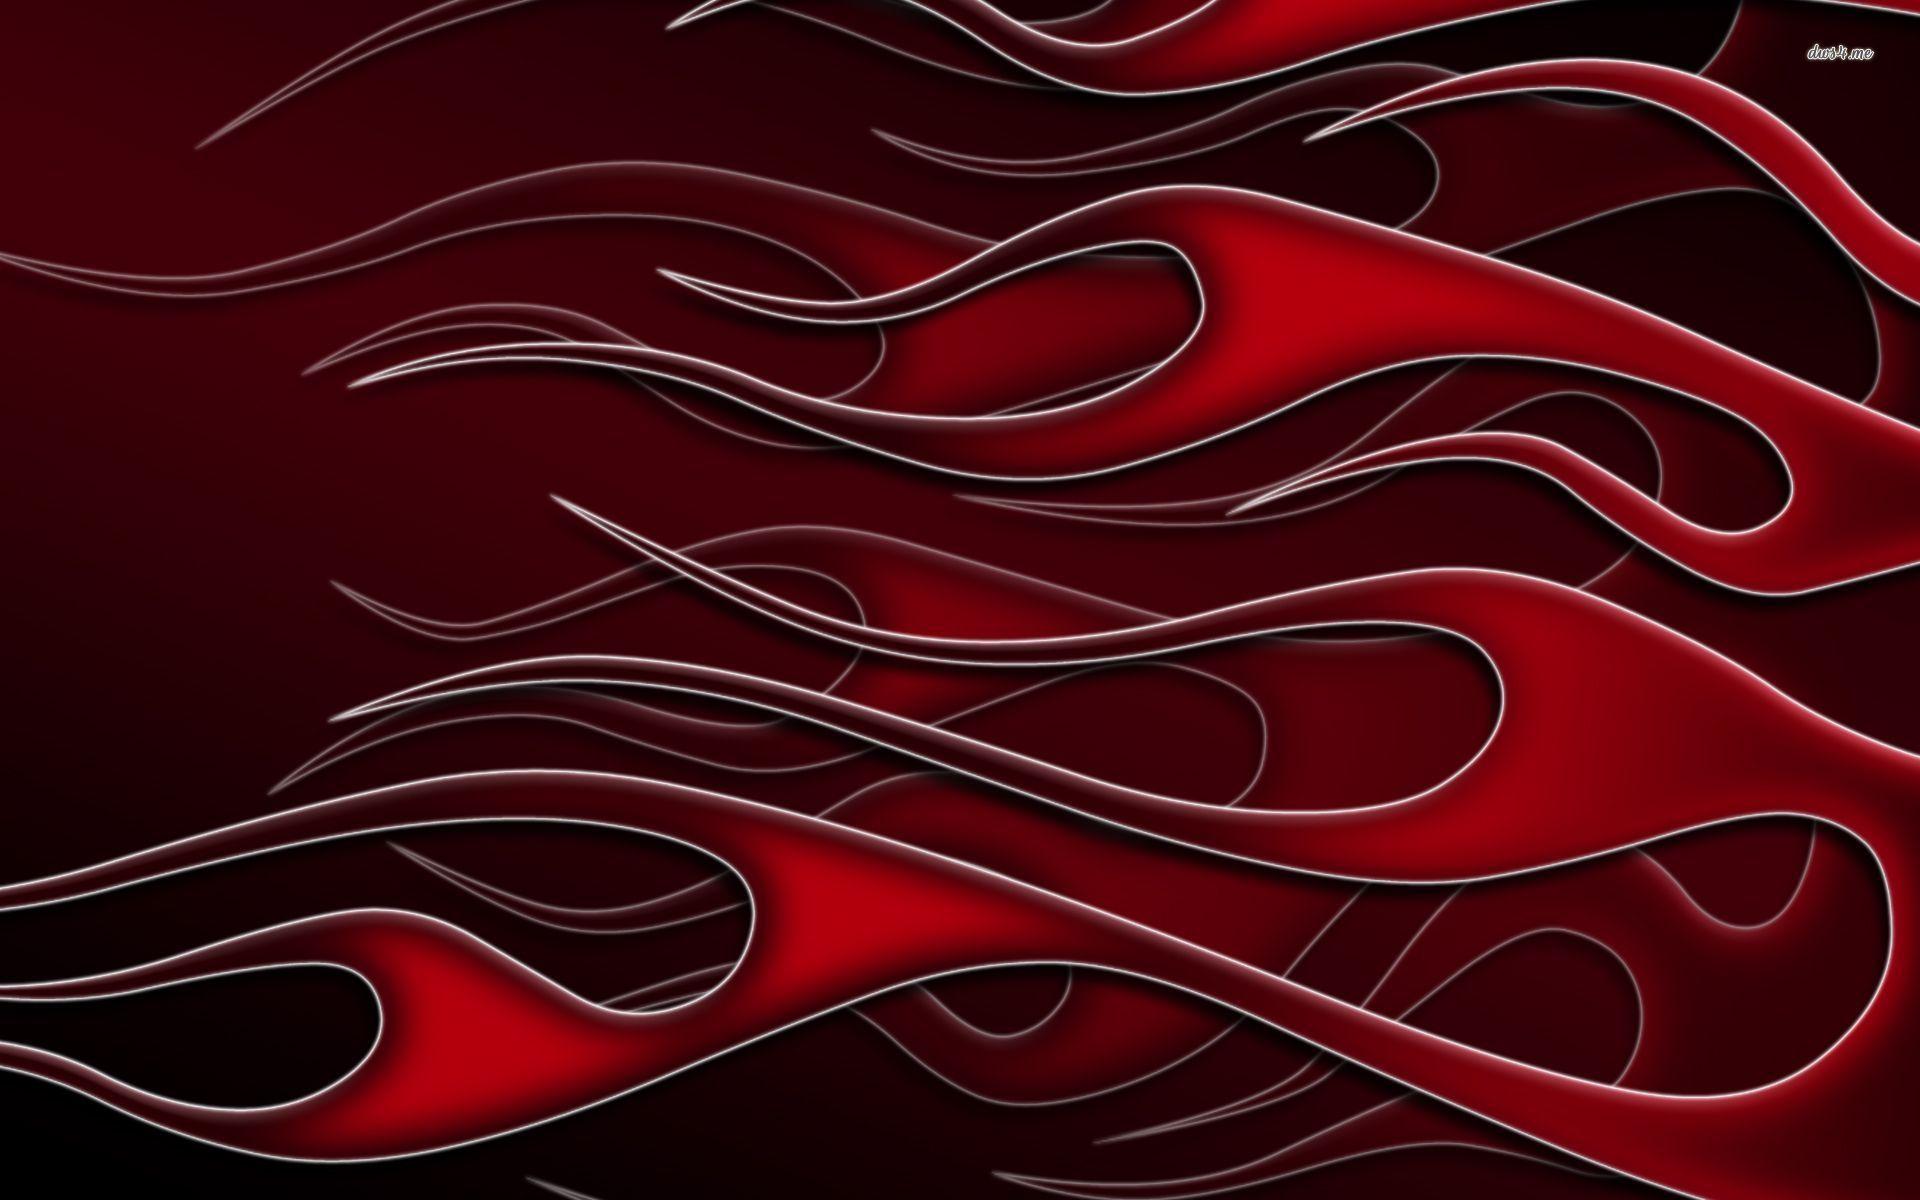 Wallpaper For > Red And Black Flames Wallpaper